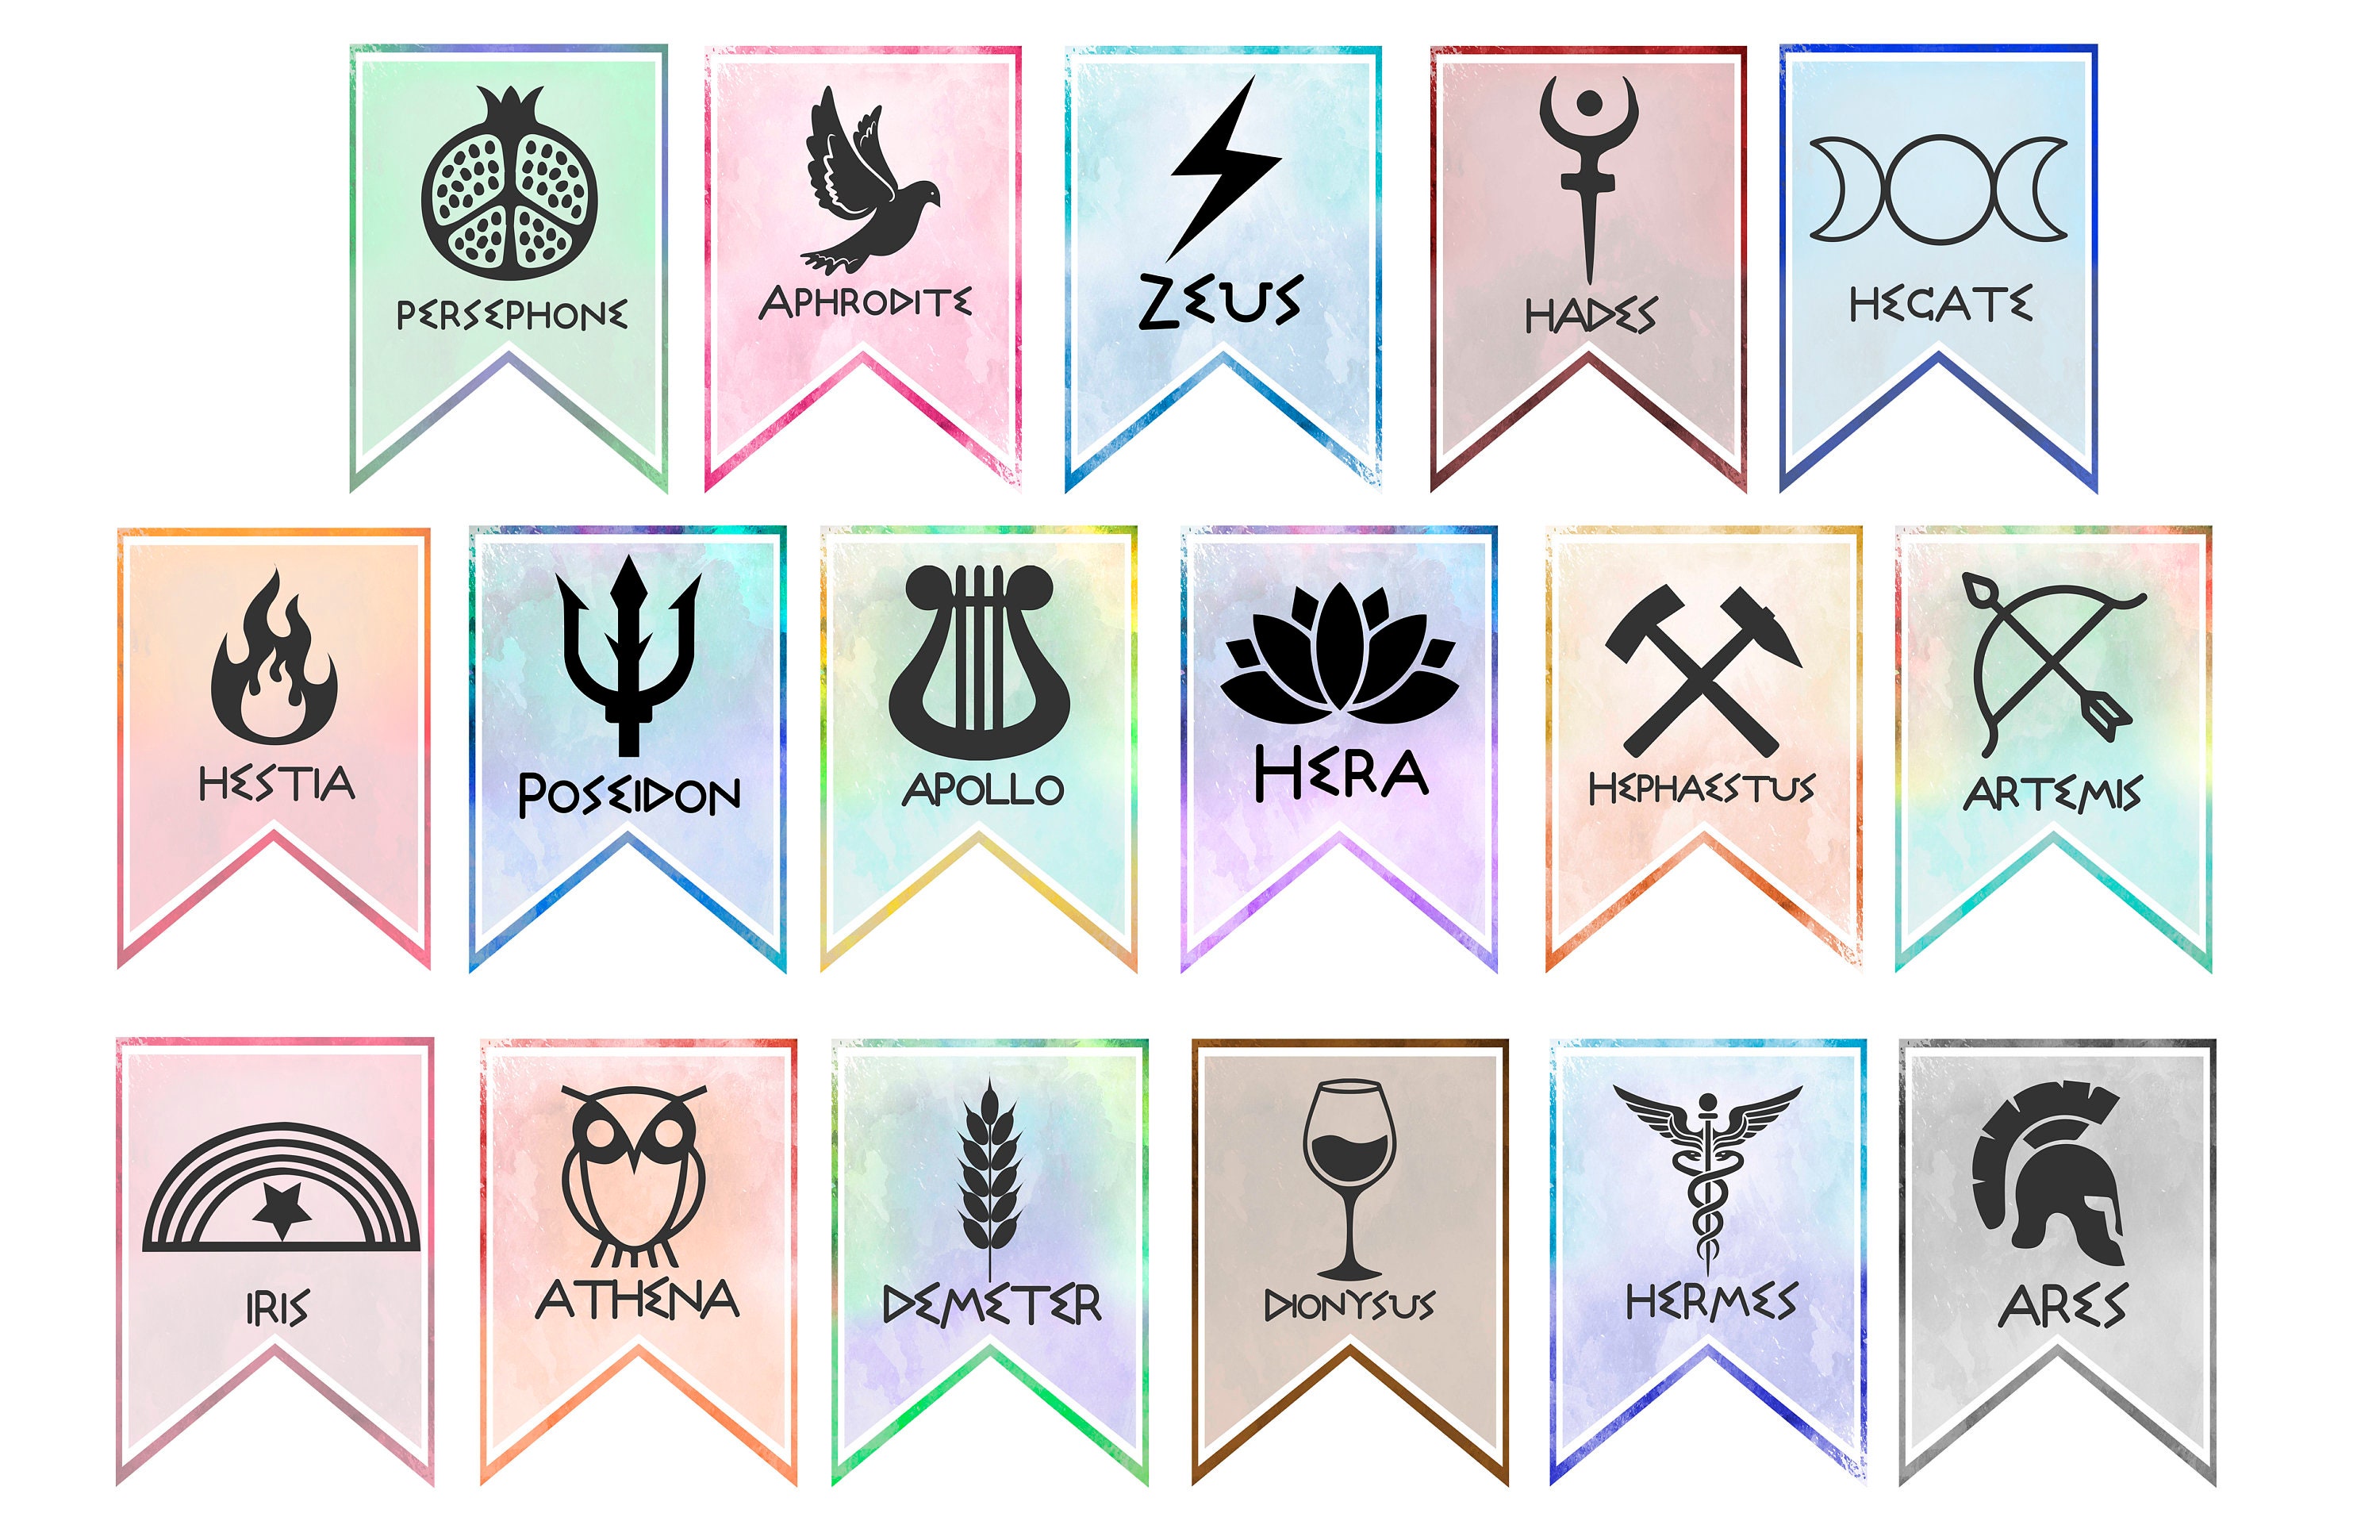 Greek Gods Symbols And Their Meanings